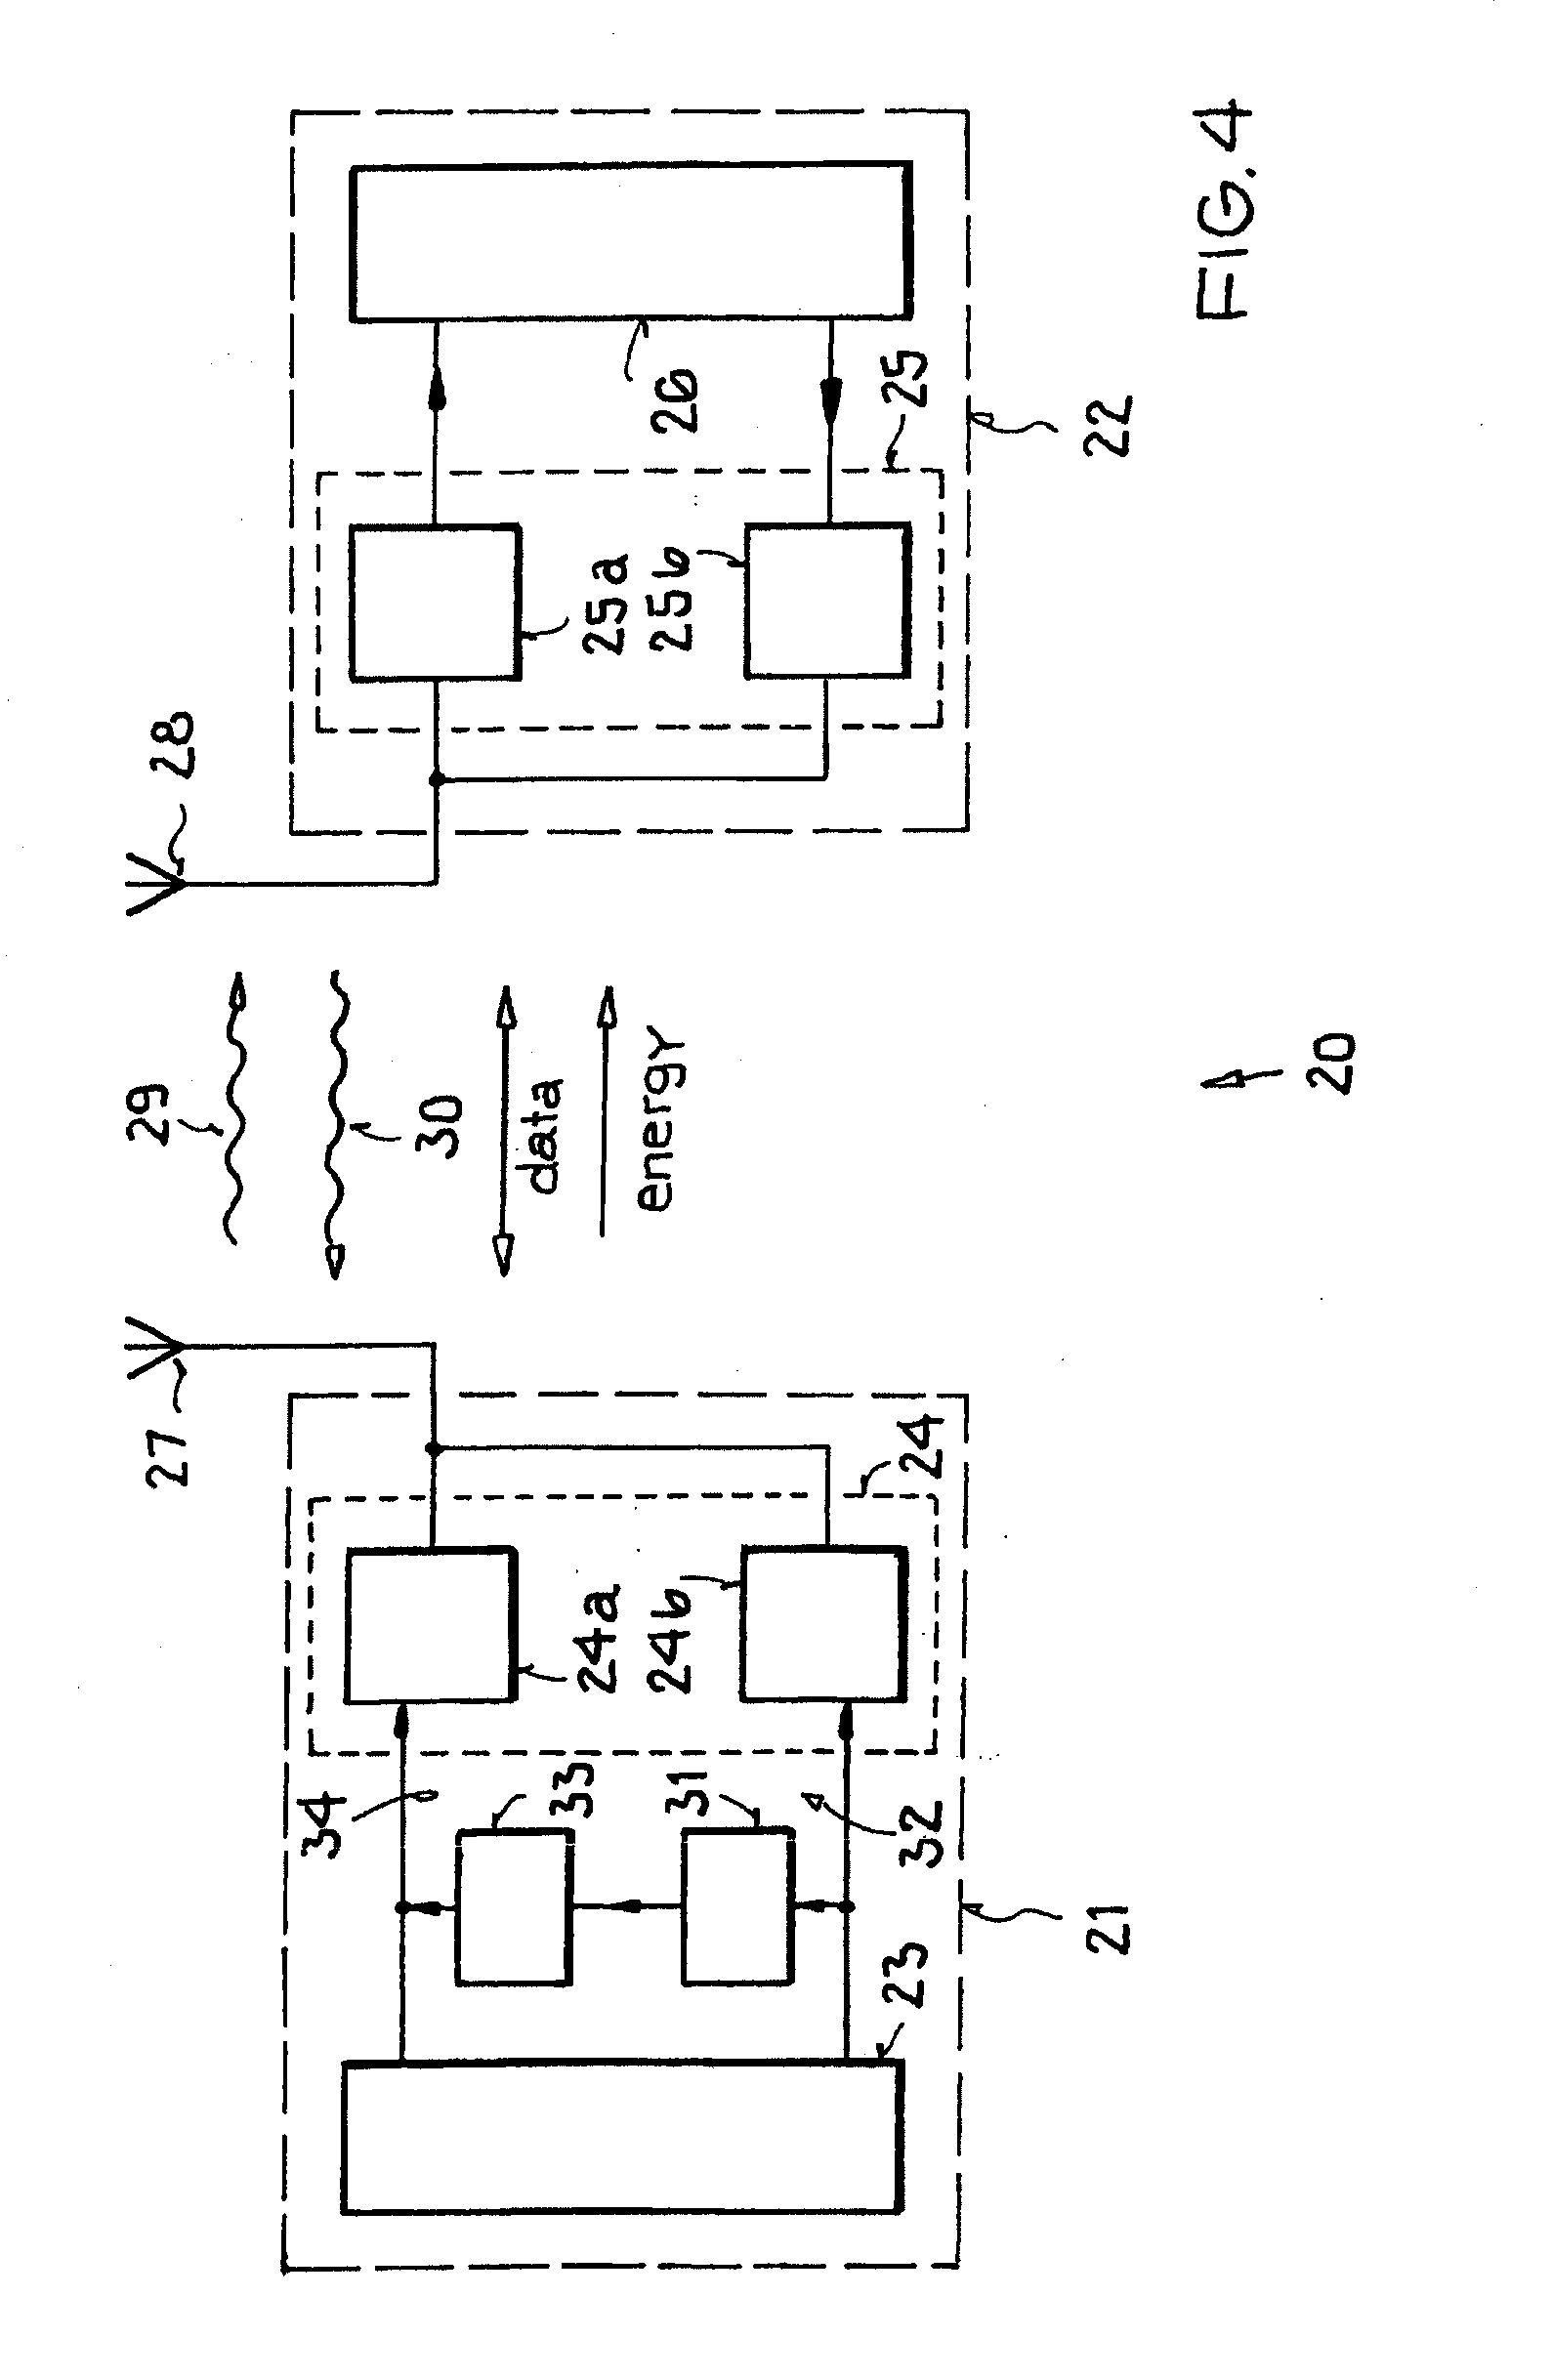 Method and Apparatus for Data Communication Between a Base Station and a Transponder